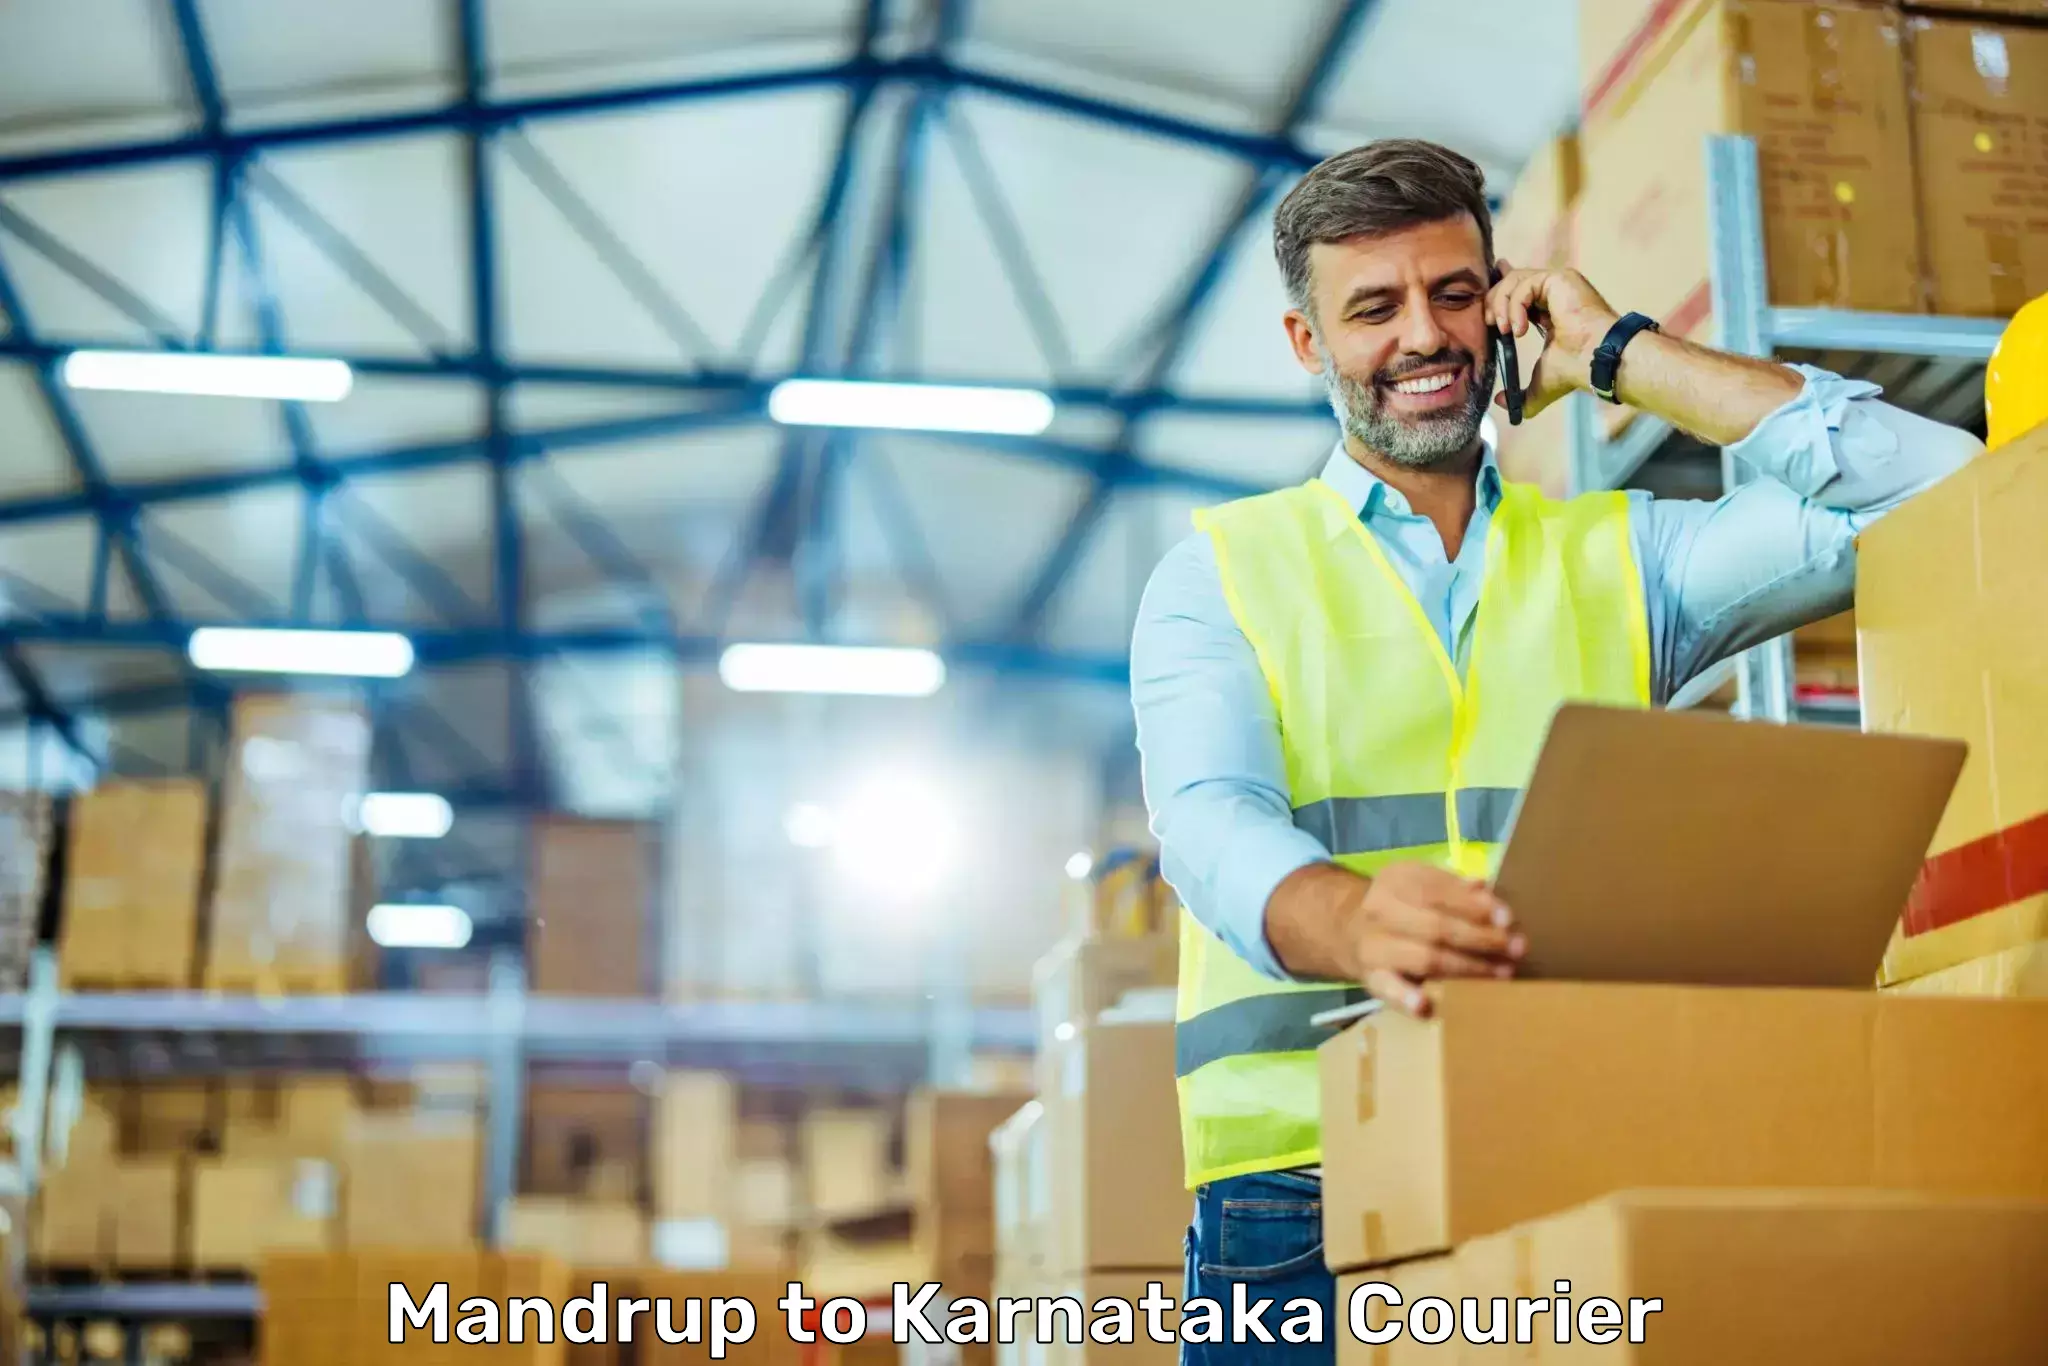 On-demand shipping options Mandrup to Manipal